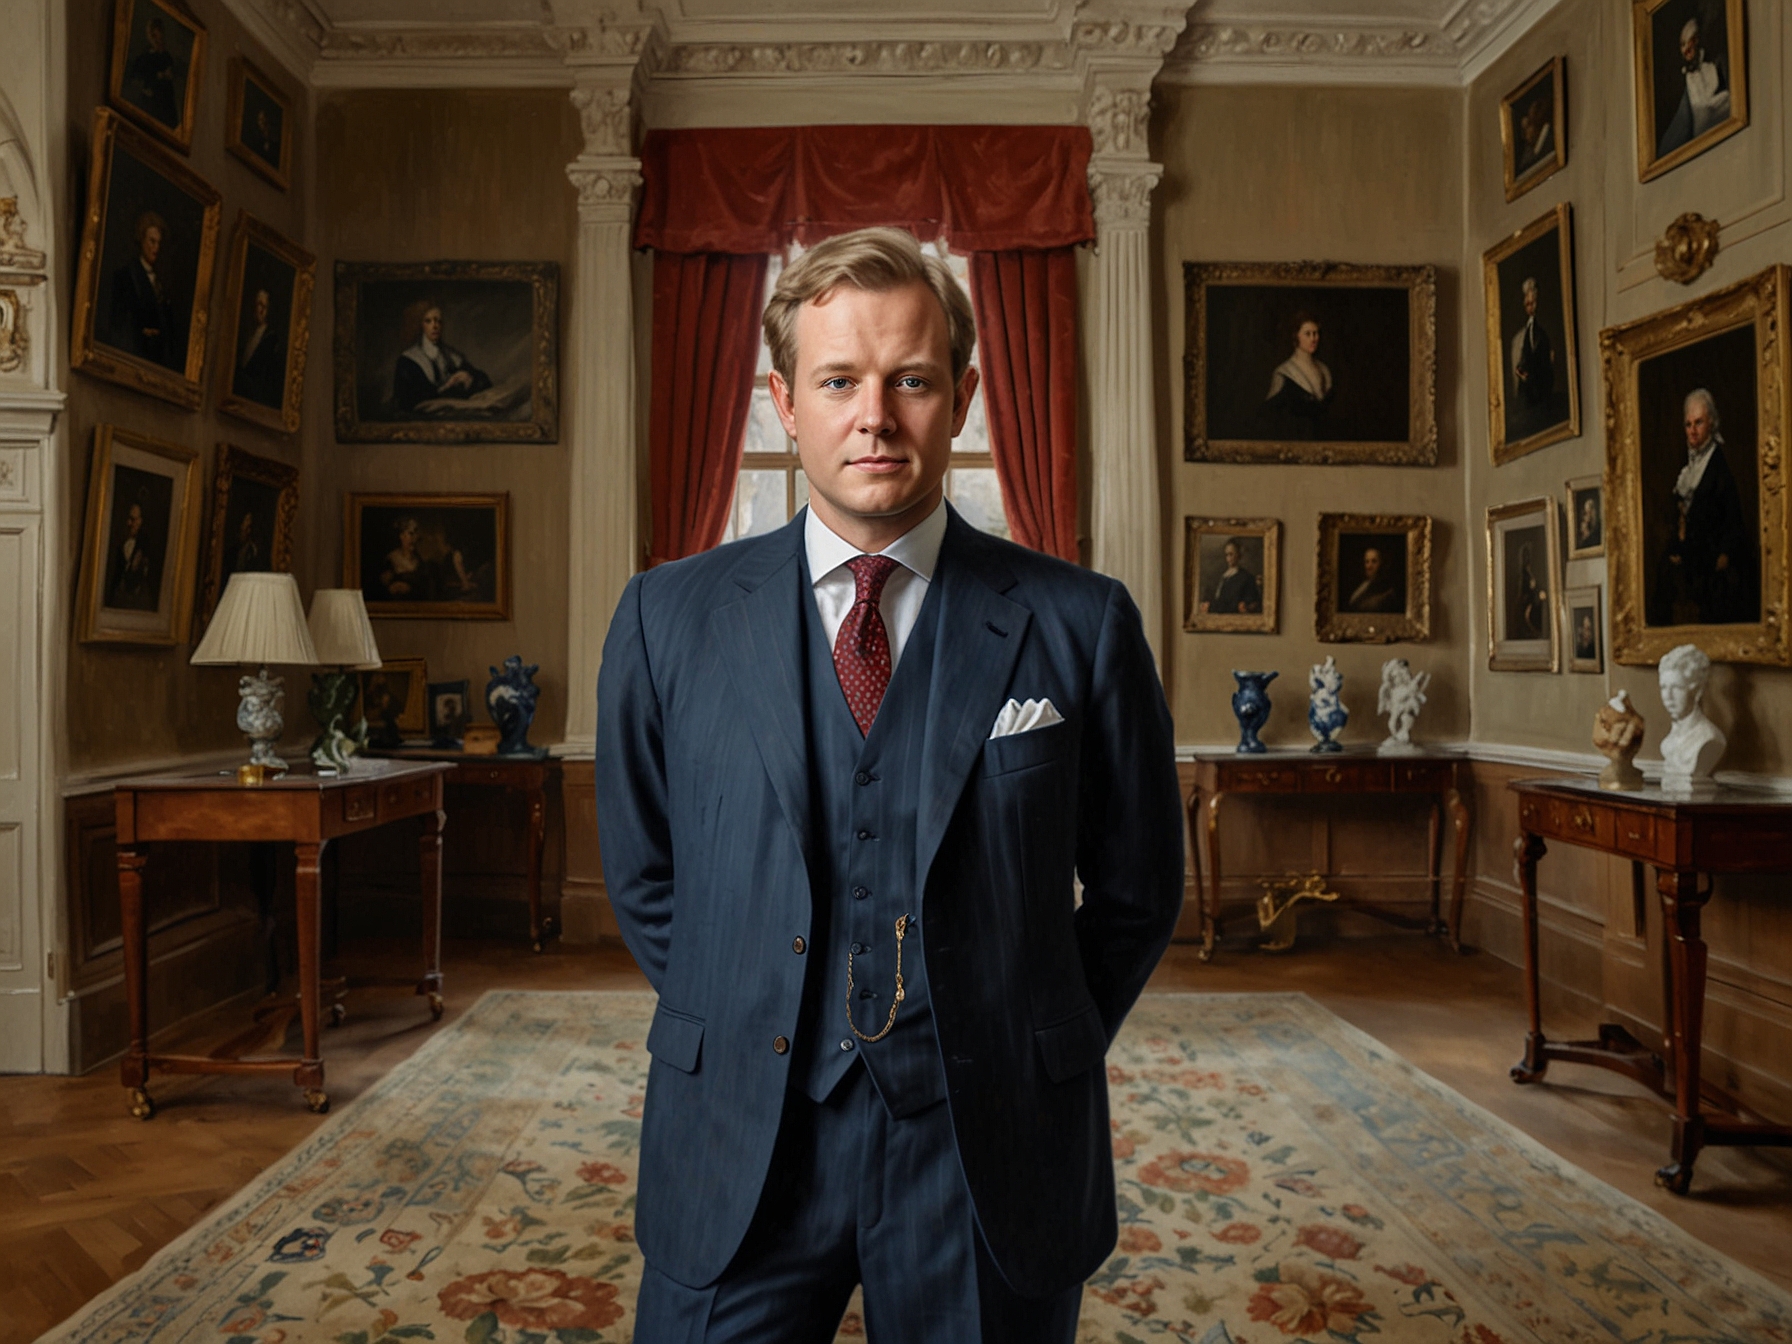 Louis Spencer, Viscount Althorp, posing in front of historical artifacts, symbolizing his role as the future custodian of the Althorp Estate and its rich cultural heritage.